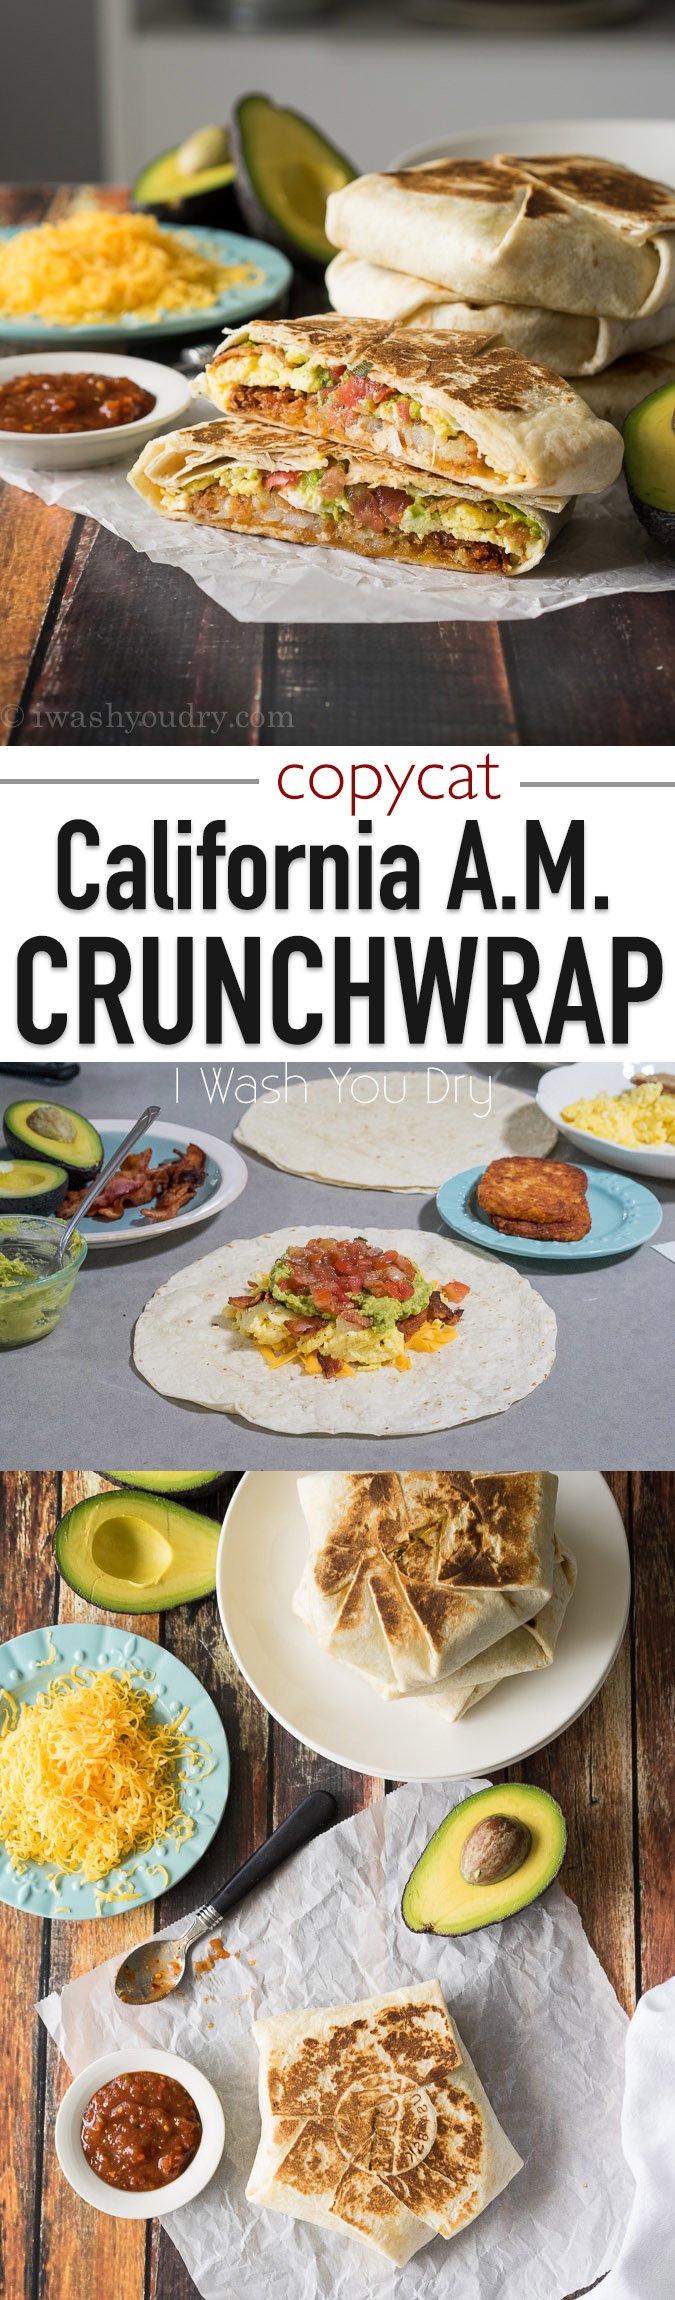 Move over Taco Bell! This breakfast CopyCat California AM Crunchwrap is filled with eggs, crispy hash browns, bacon and avocado! It's downright delicious!